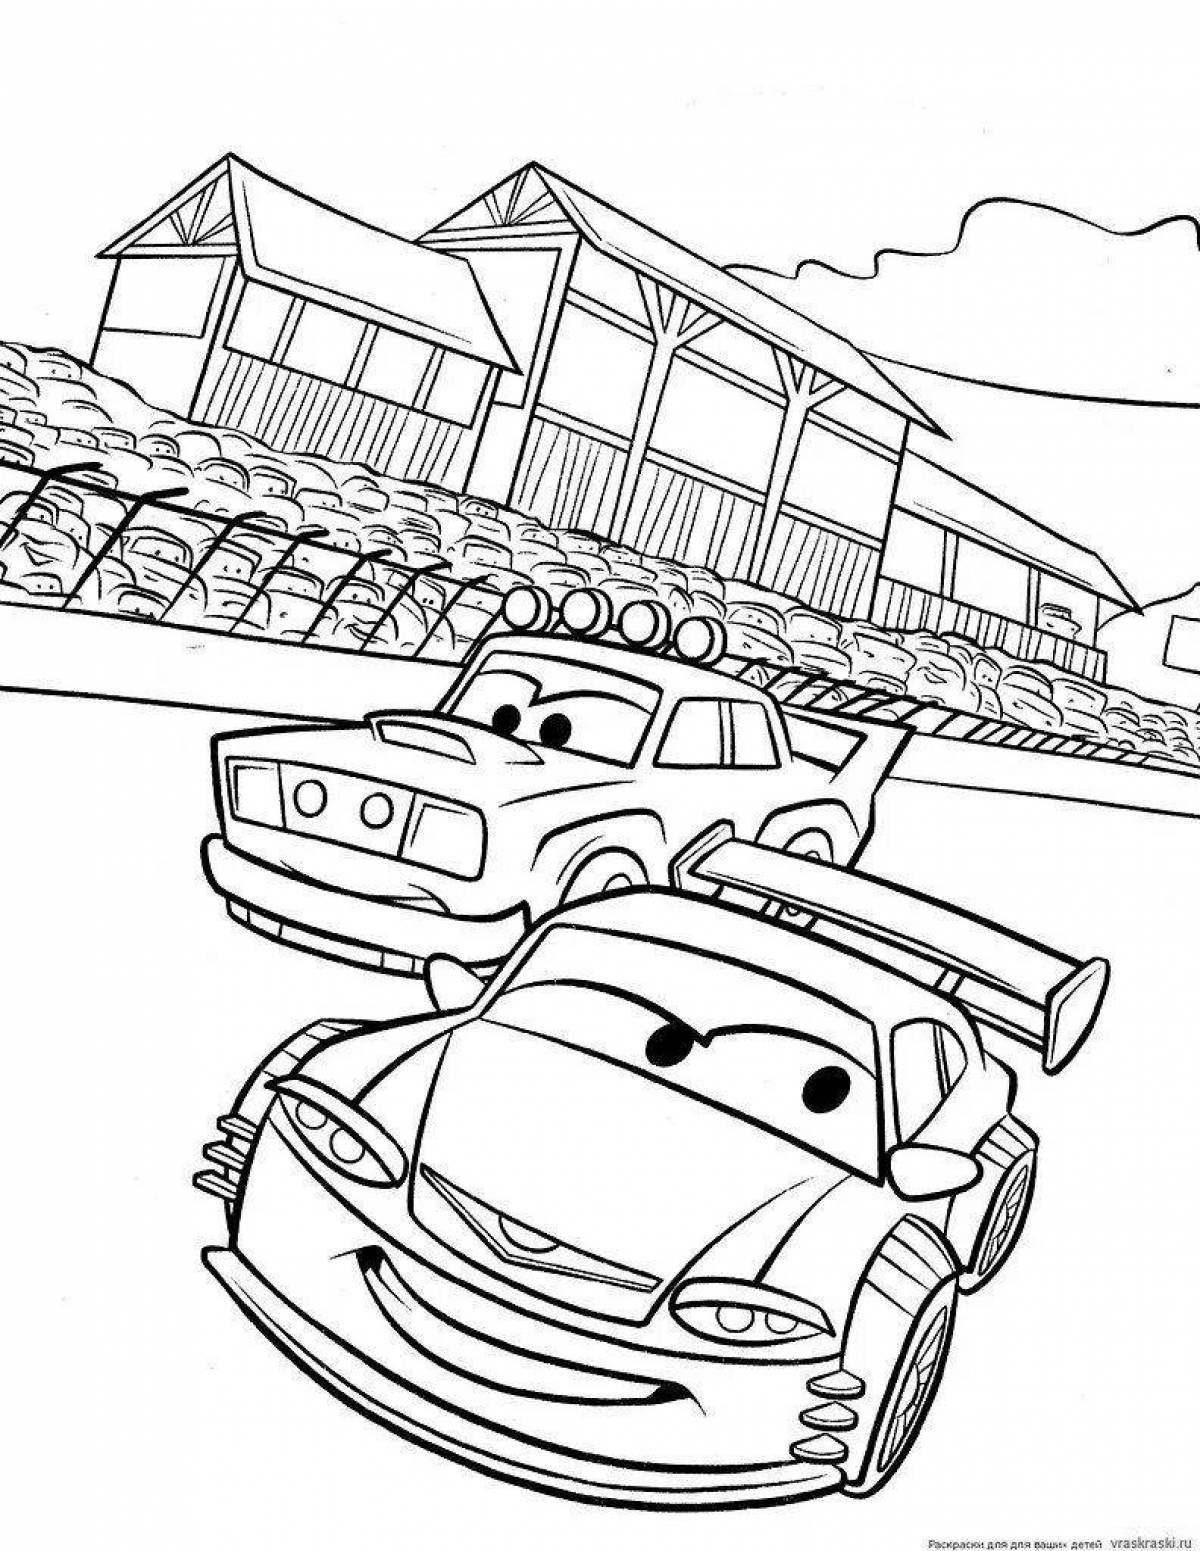 Animated supercar coloring page